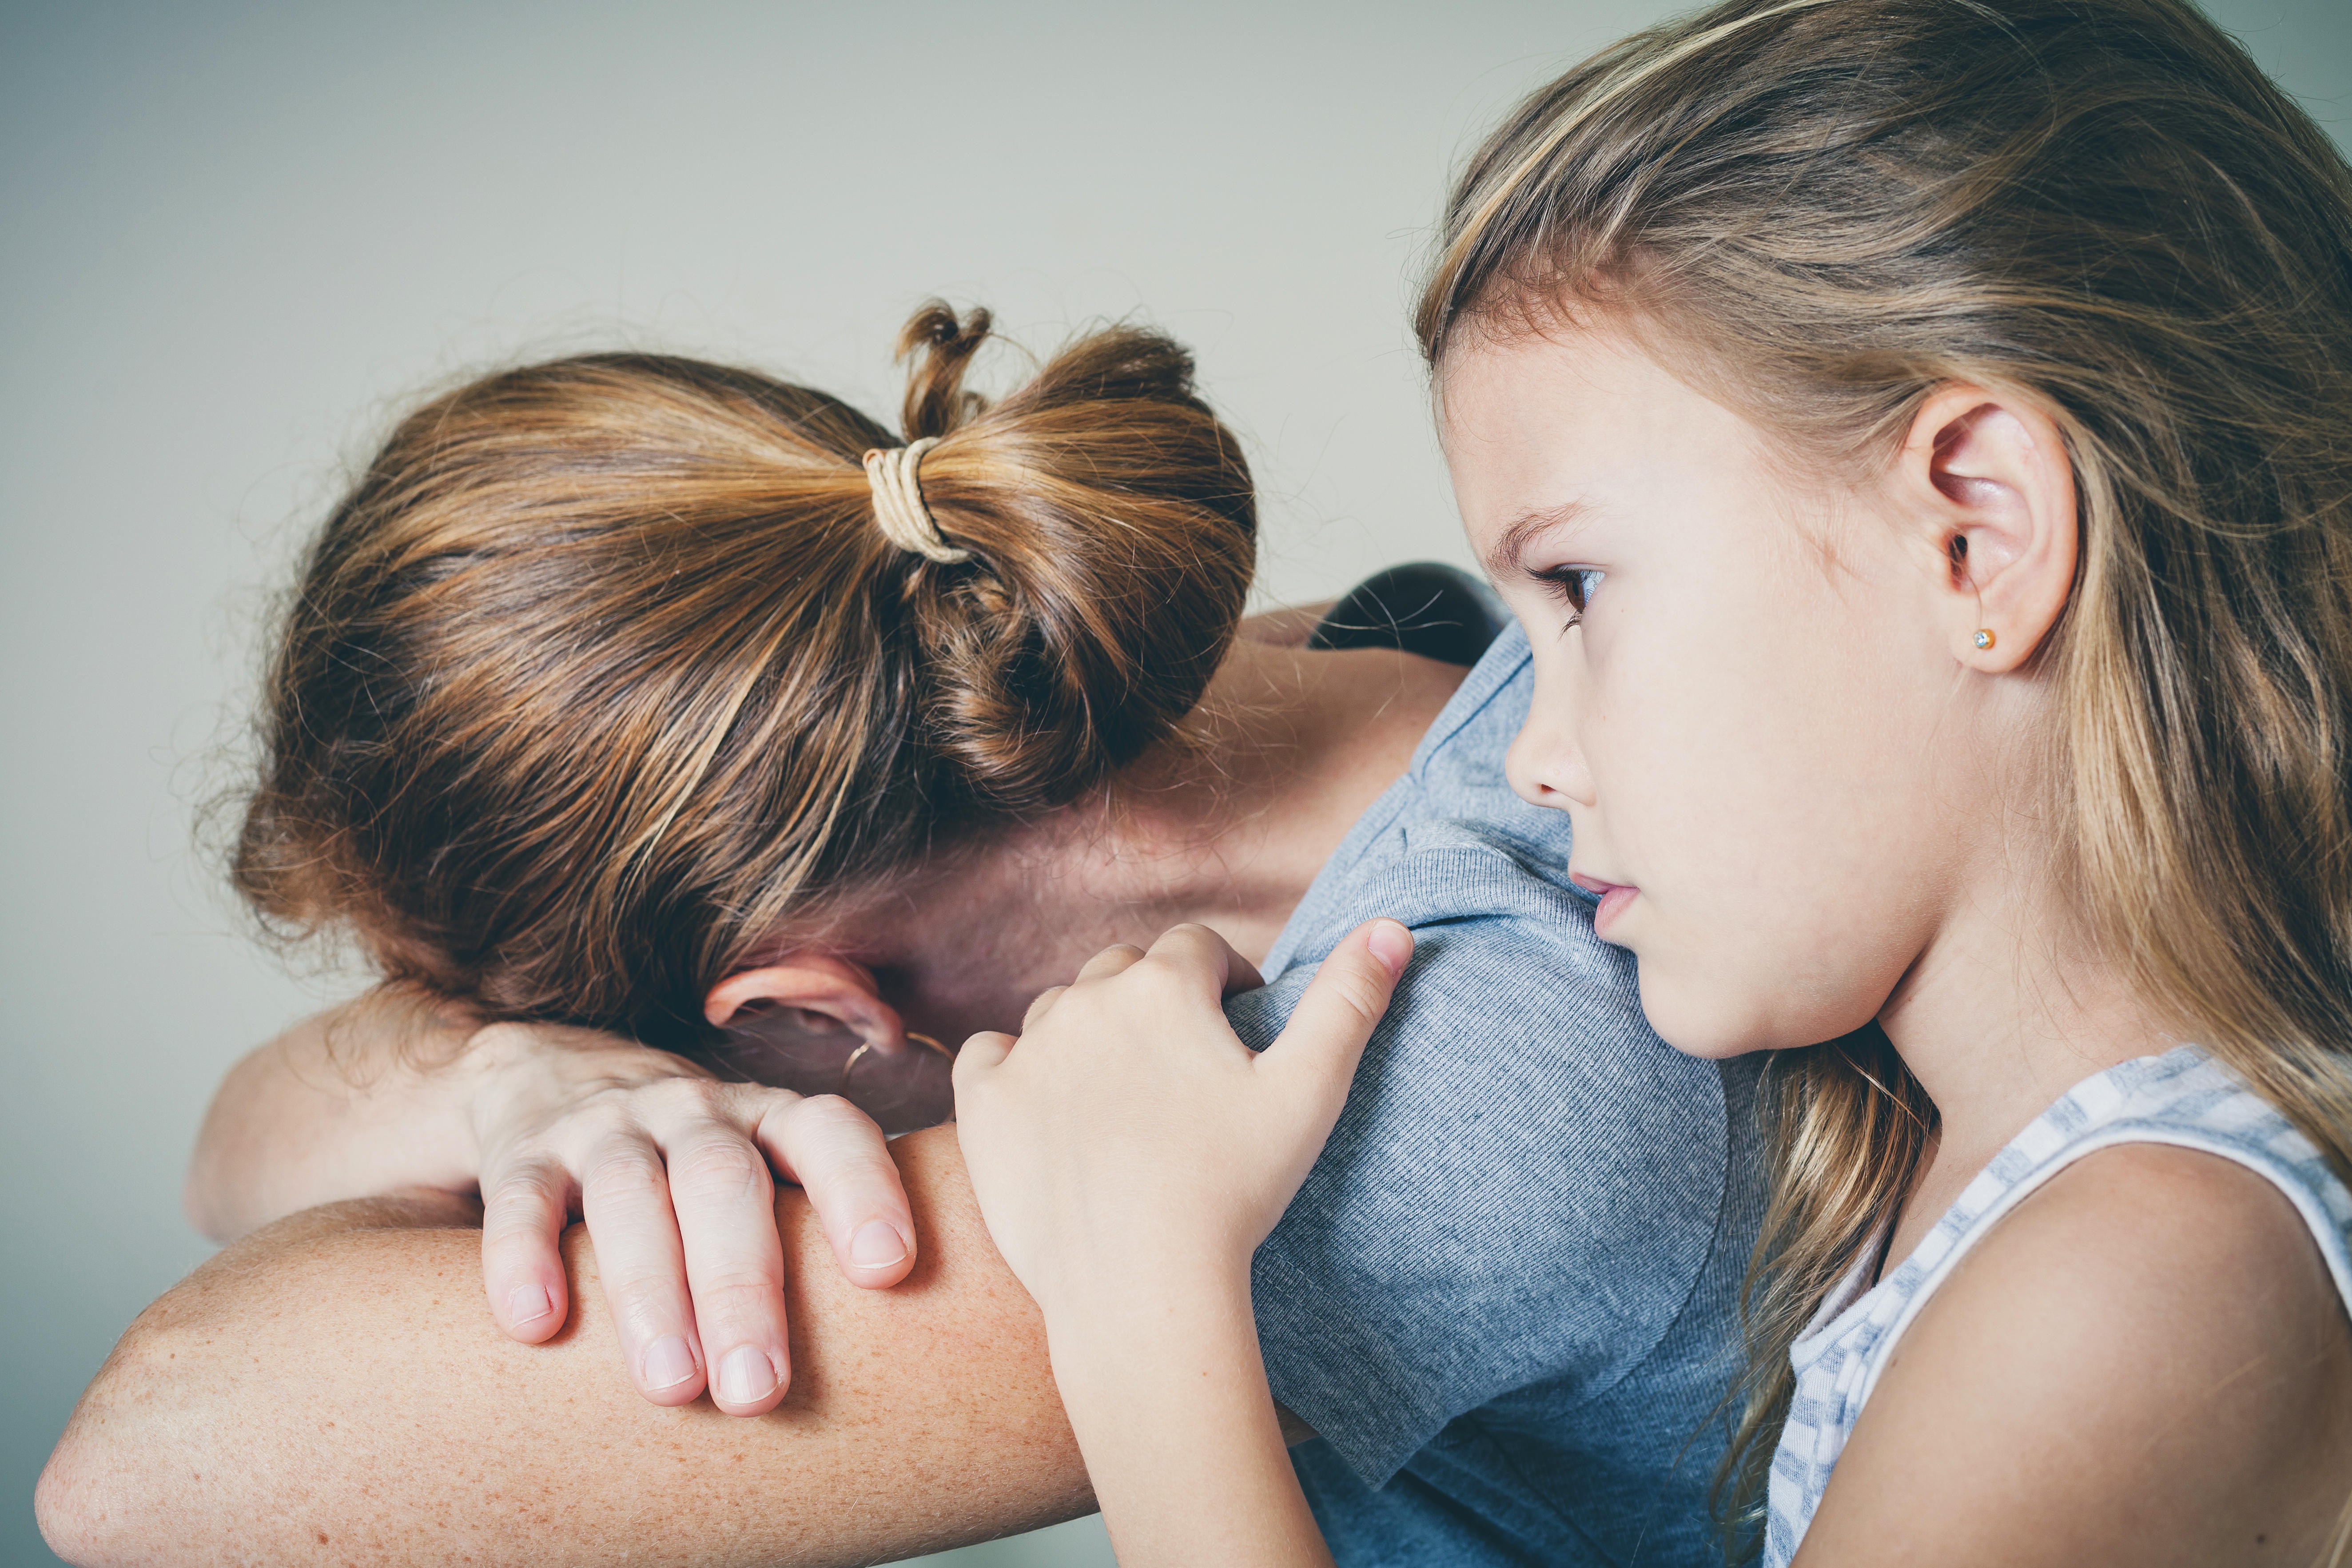 Postnatal depression may not present for years. Photo: Alamy